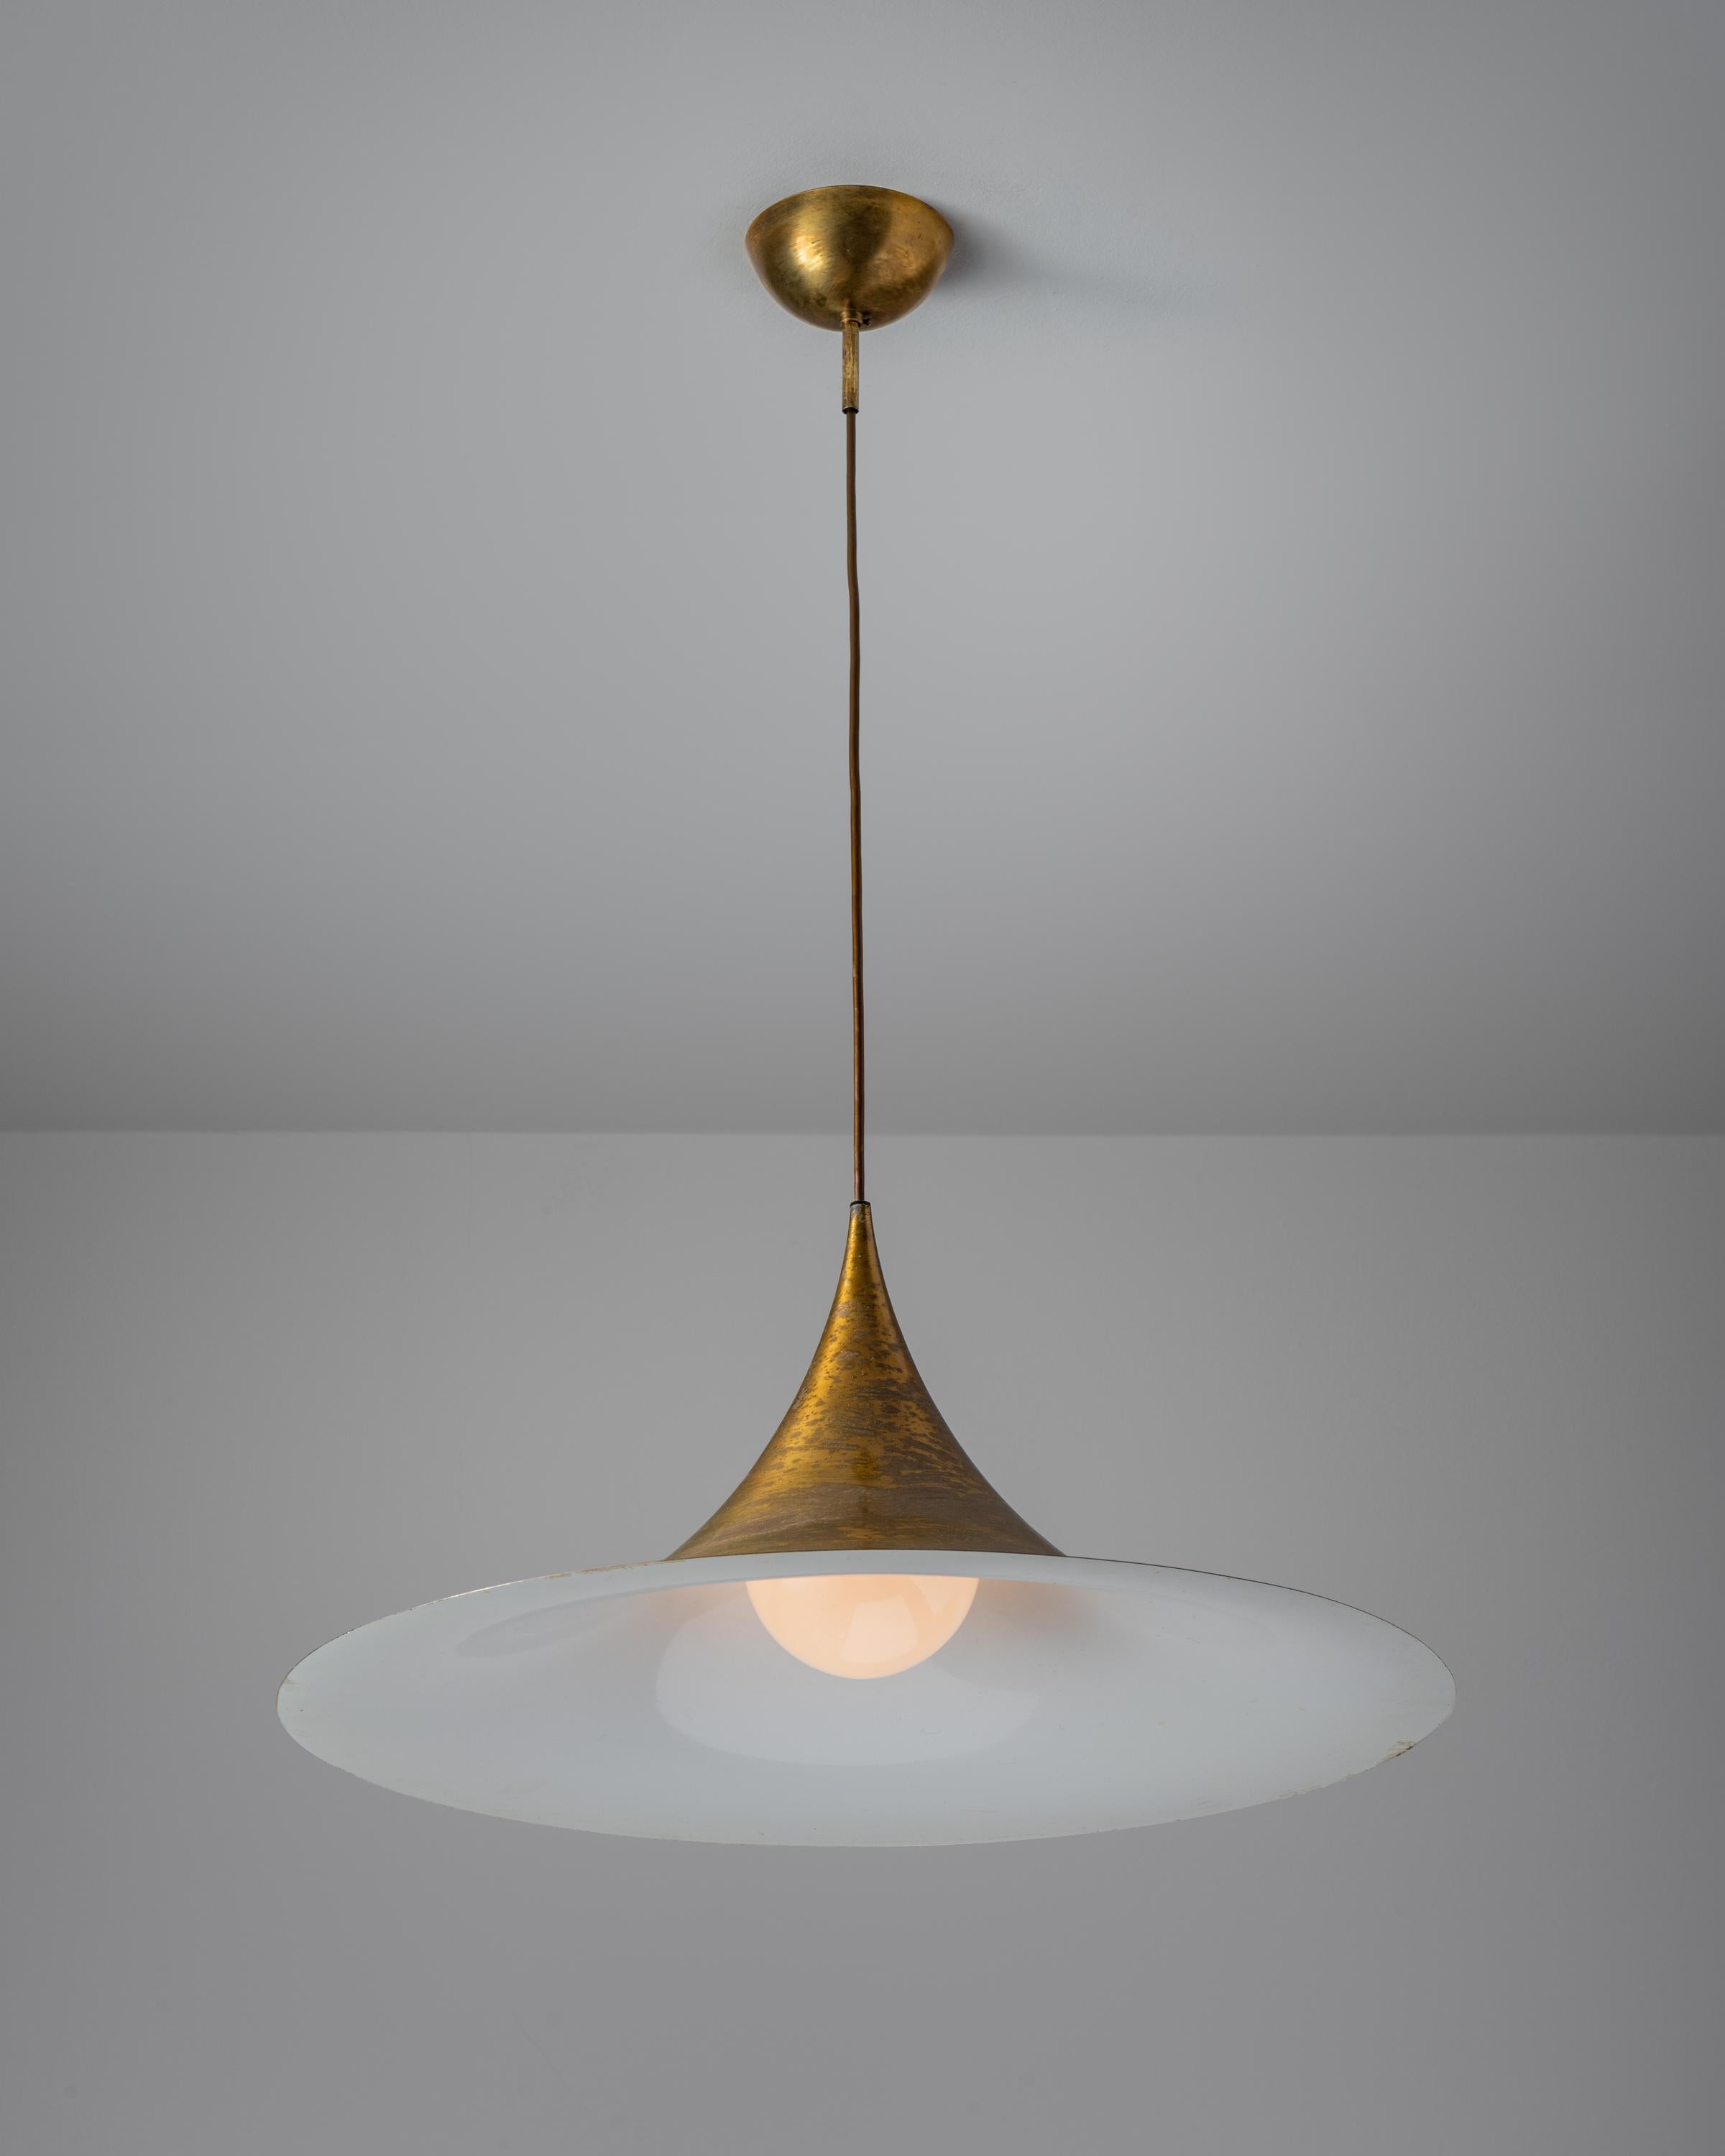 Original early solid brass semi pendant by Claus Bonderup and Torsten Thorup for Fog & Mørup. Manufactured in Denmark, circa 1970's. Brass. Original canopy, wired for U.S. standards. We recommend one E26 75w maximum bulb. Bulb provided as a onetime